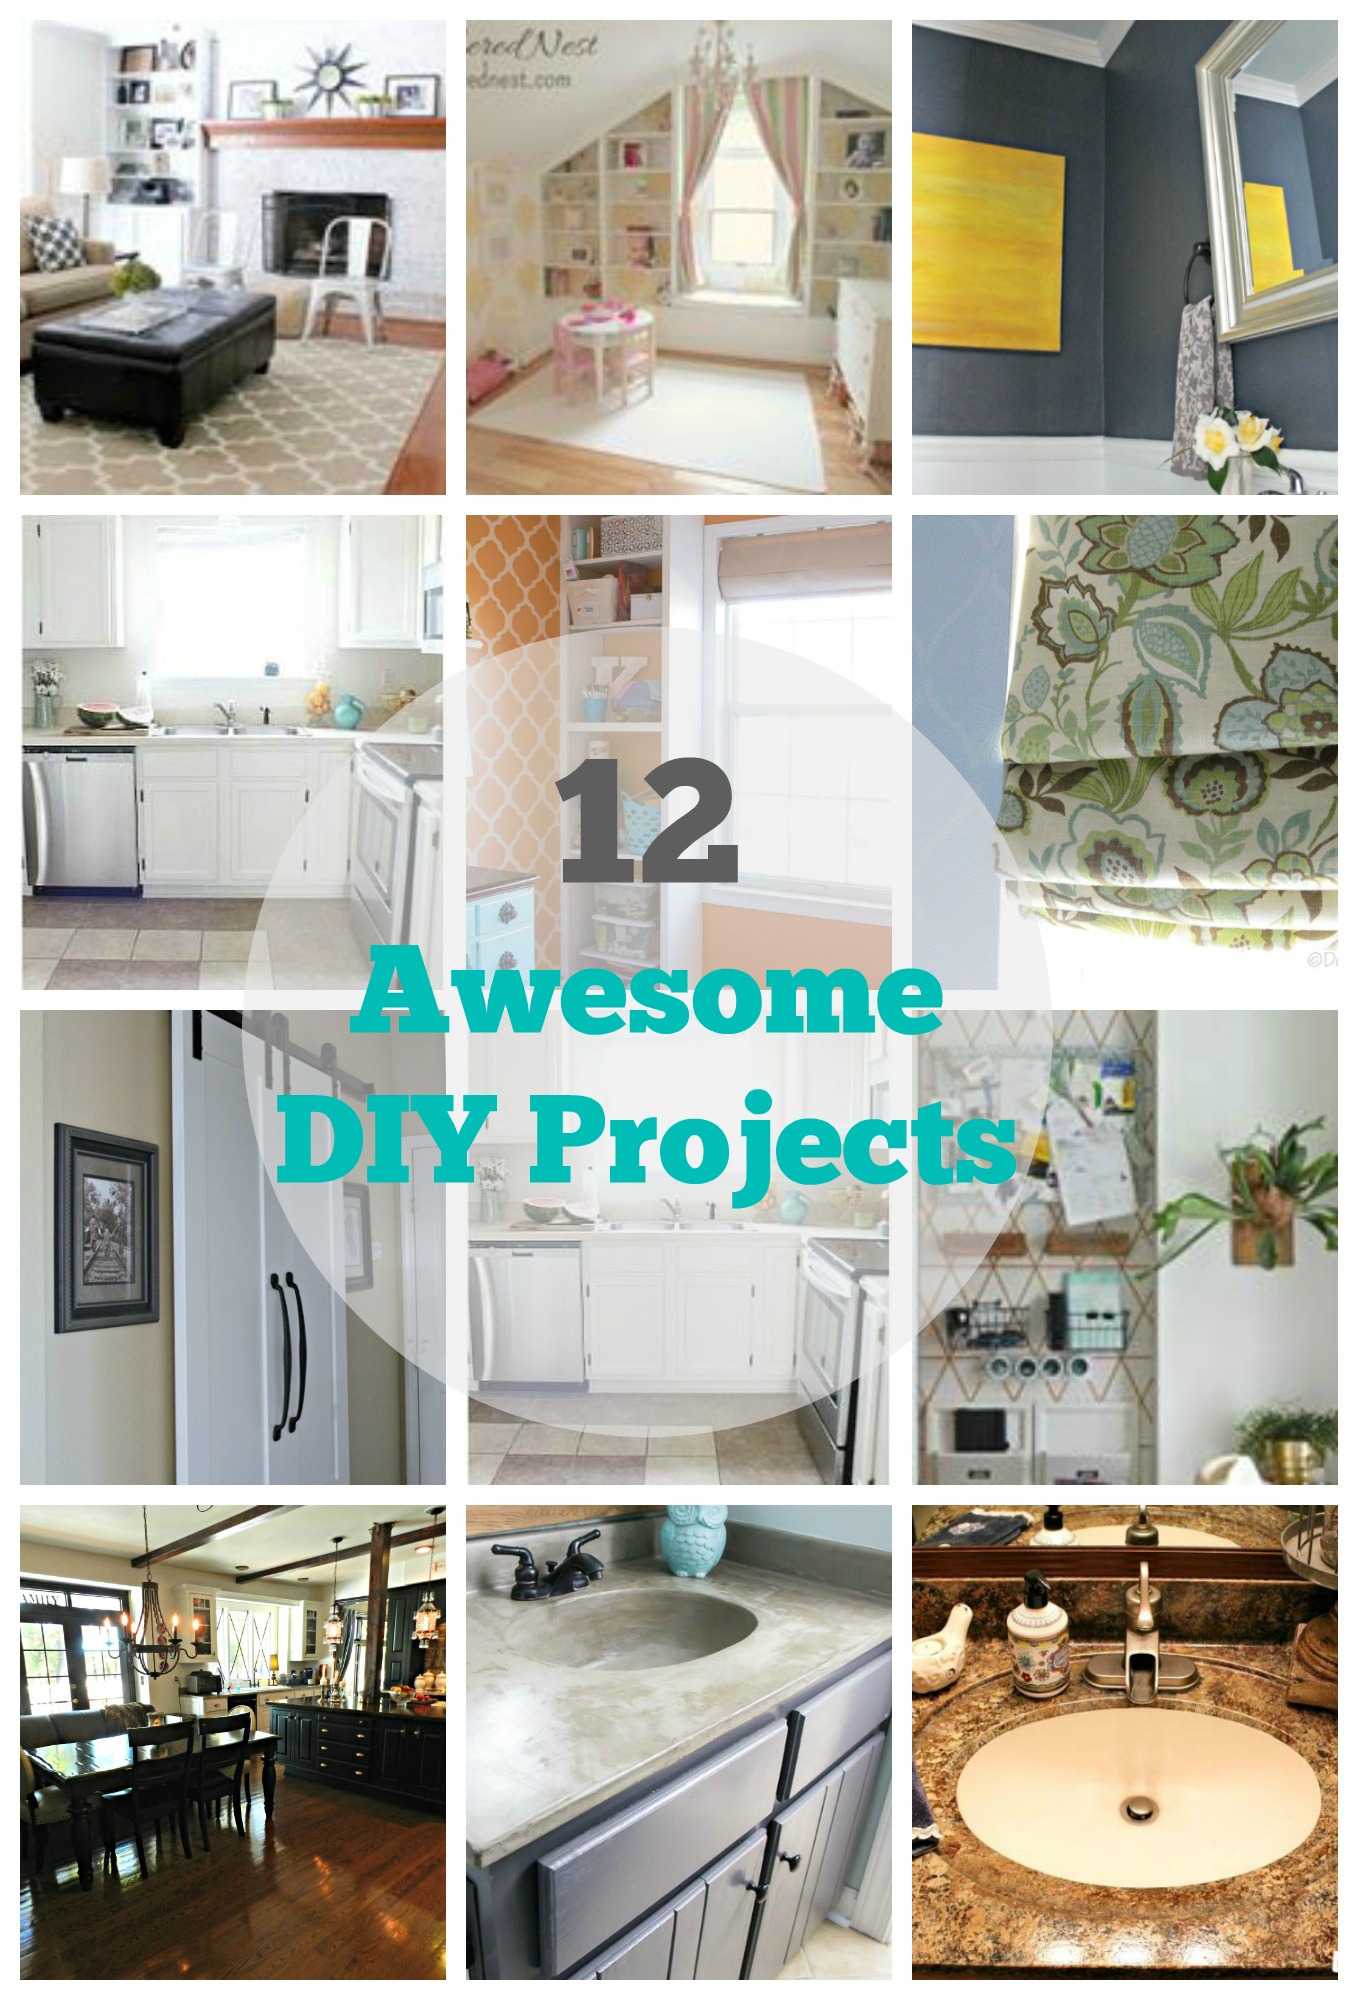 12 DIY Home Improvement Projects - My Uncommon Slice of Suburbia